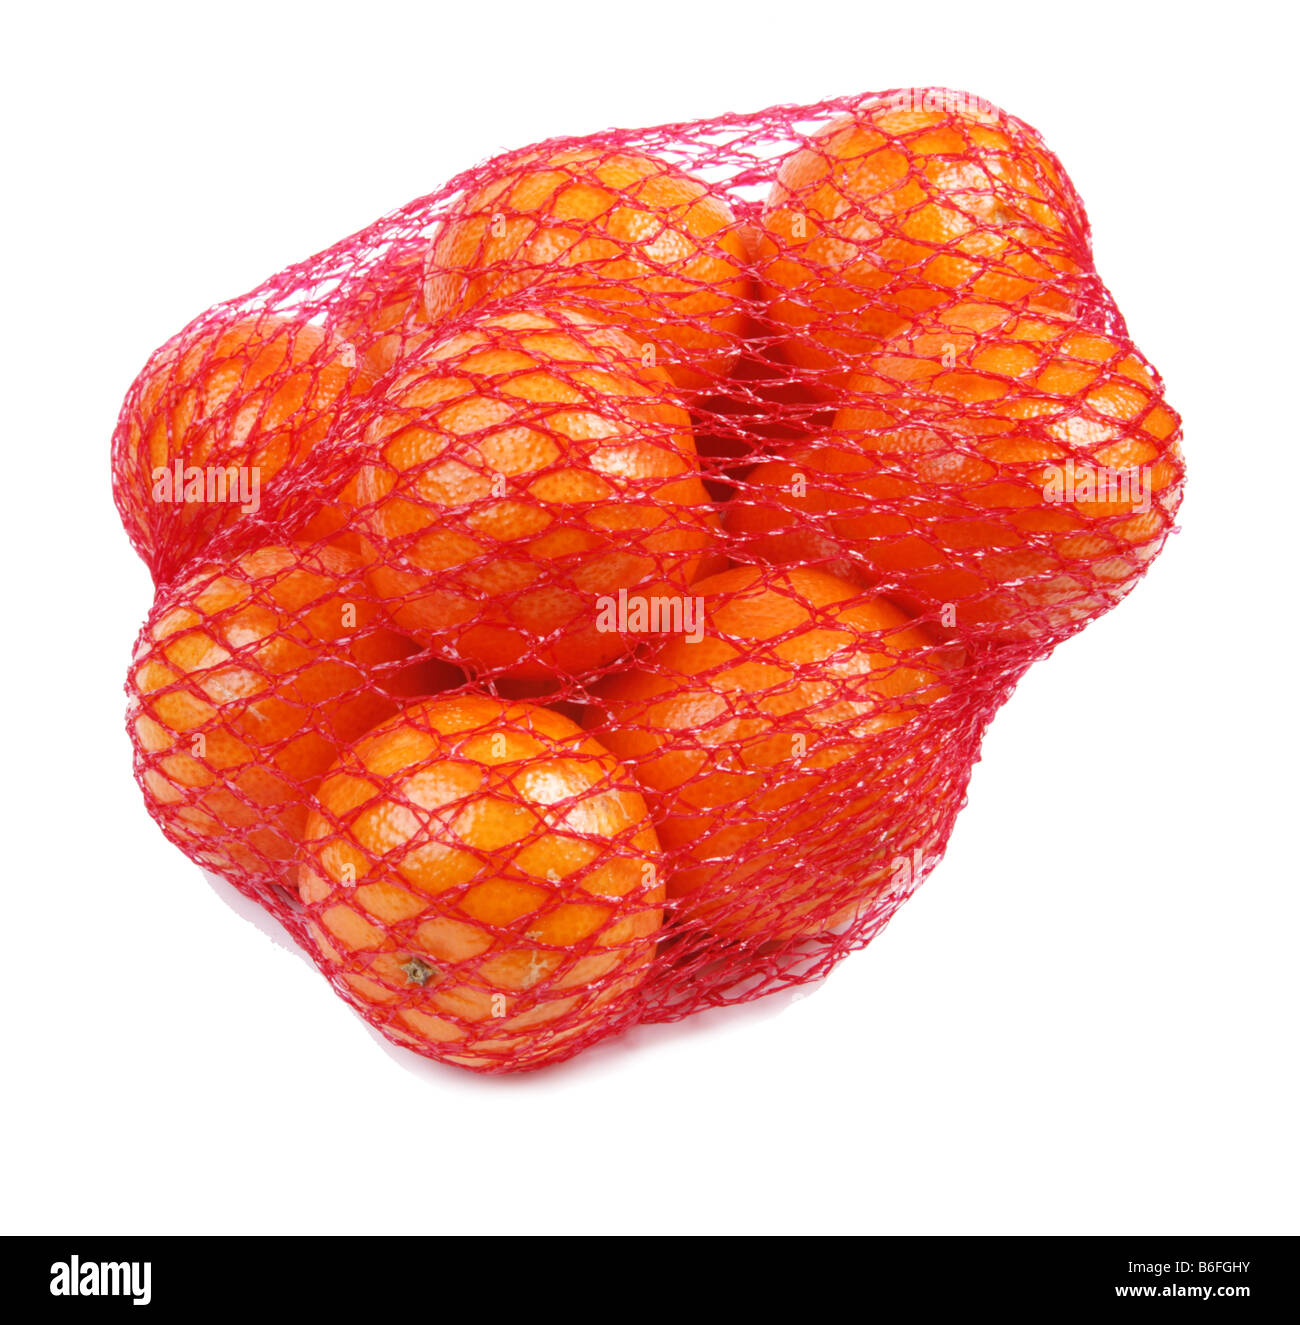 Net of Supermarket Bought Clementines Stock Photo